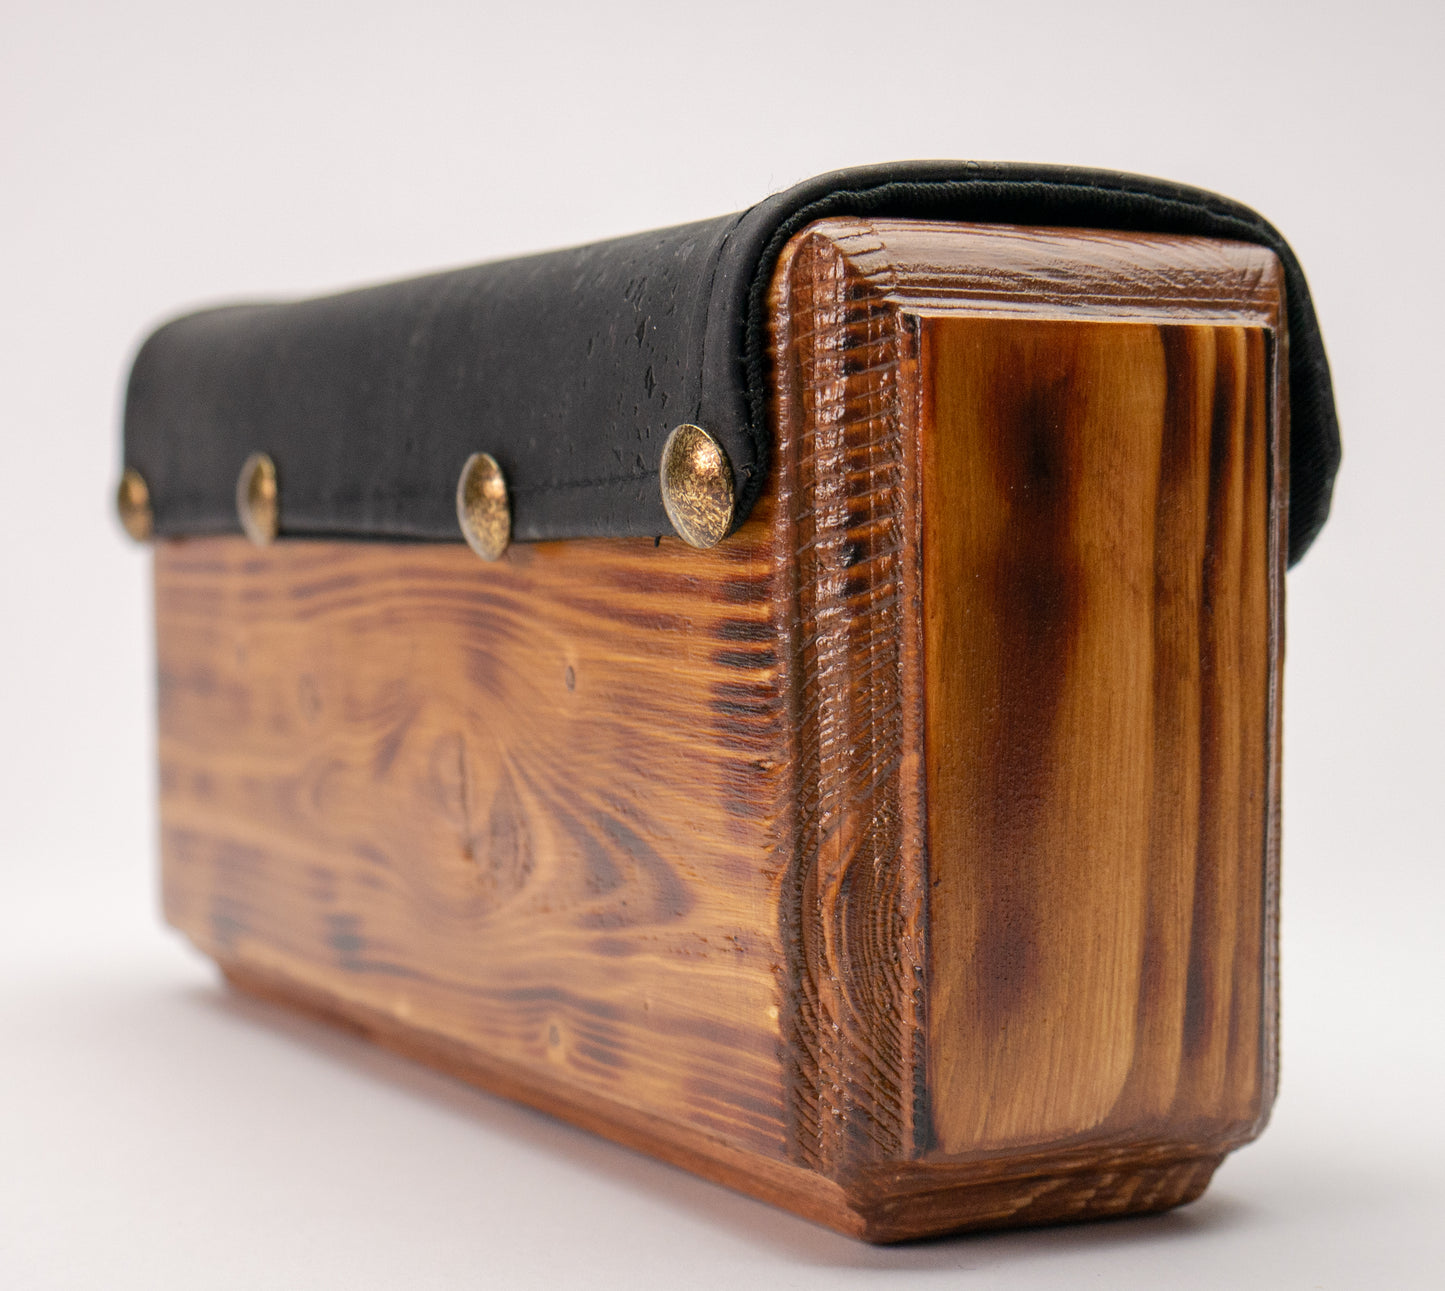 Wooden handmade purse in brown with black cork leather.